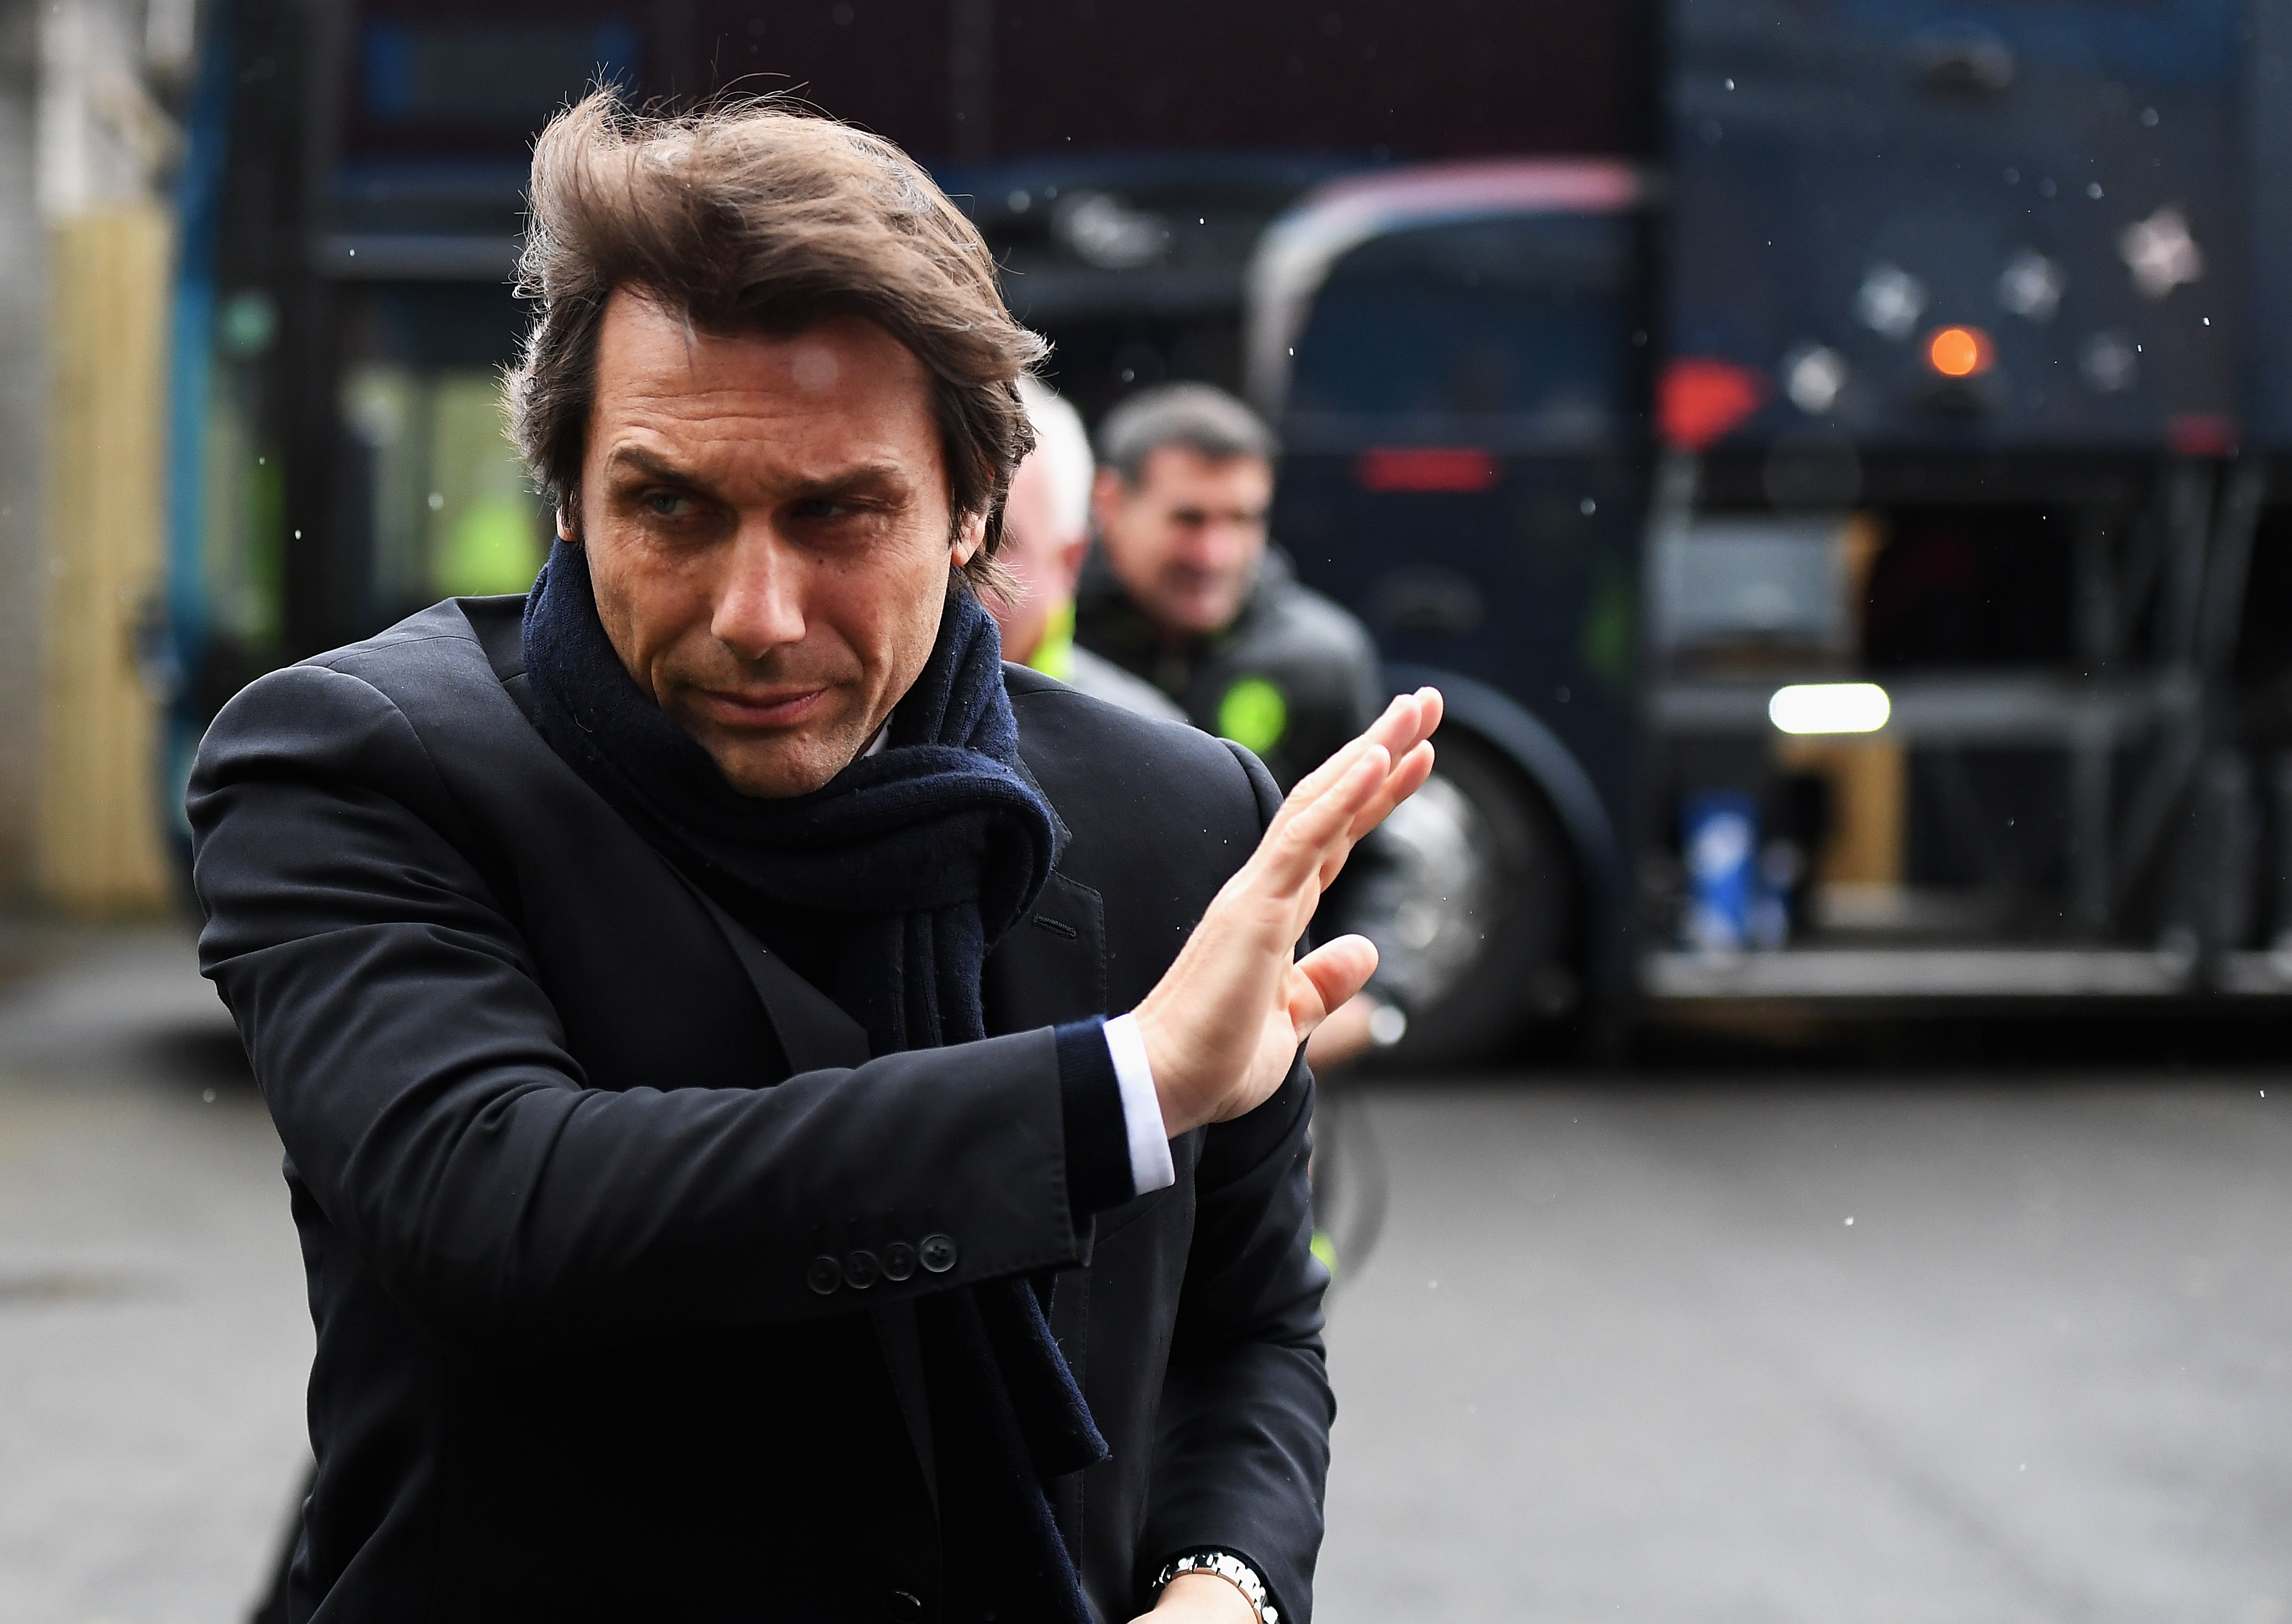 BURNLEY, ENGLAND - FEBRUARY 12:  Antonio Conte, Manager of Chelsea arrives prior to Premier League match between Burnley and Chelsea at Turf Moor on February 12, 2017 in Burnley, England.  (Photo by Mike Hewitt/Getty Images)